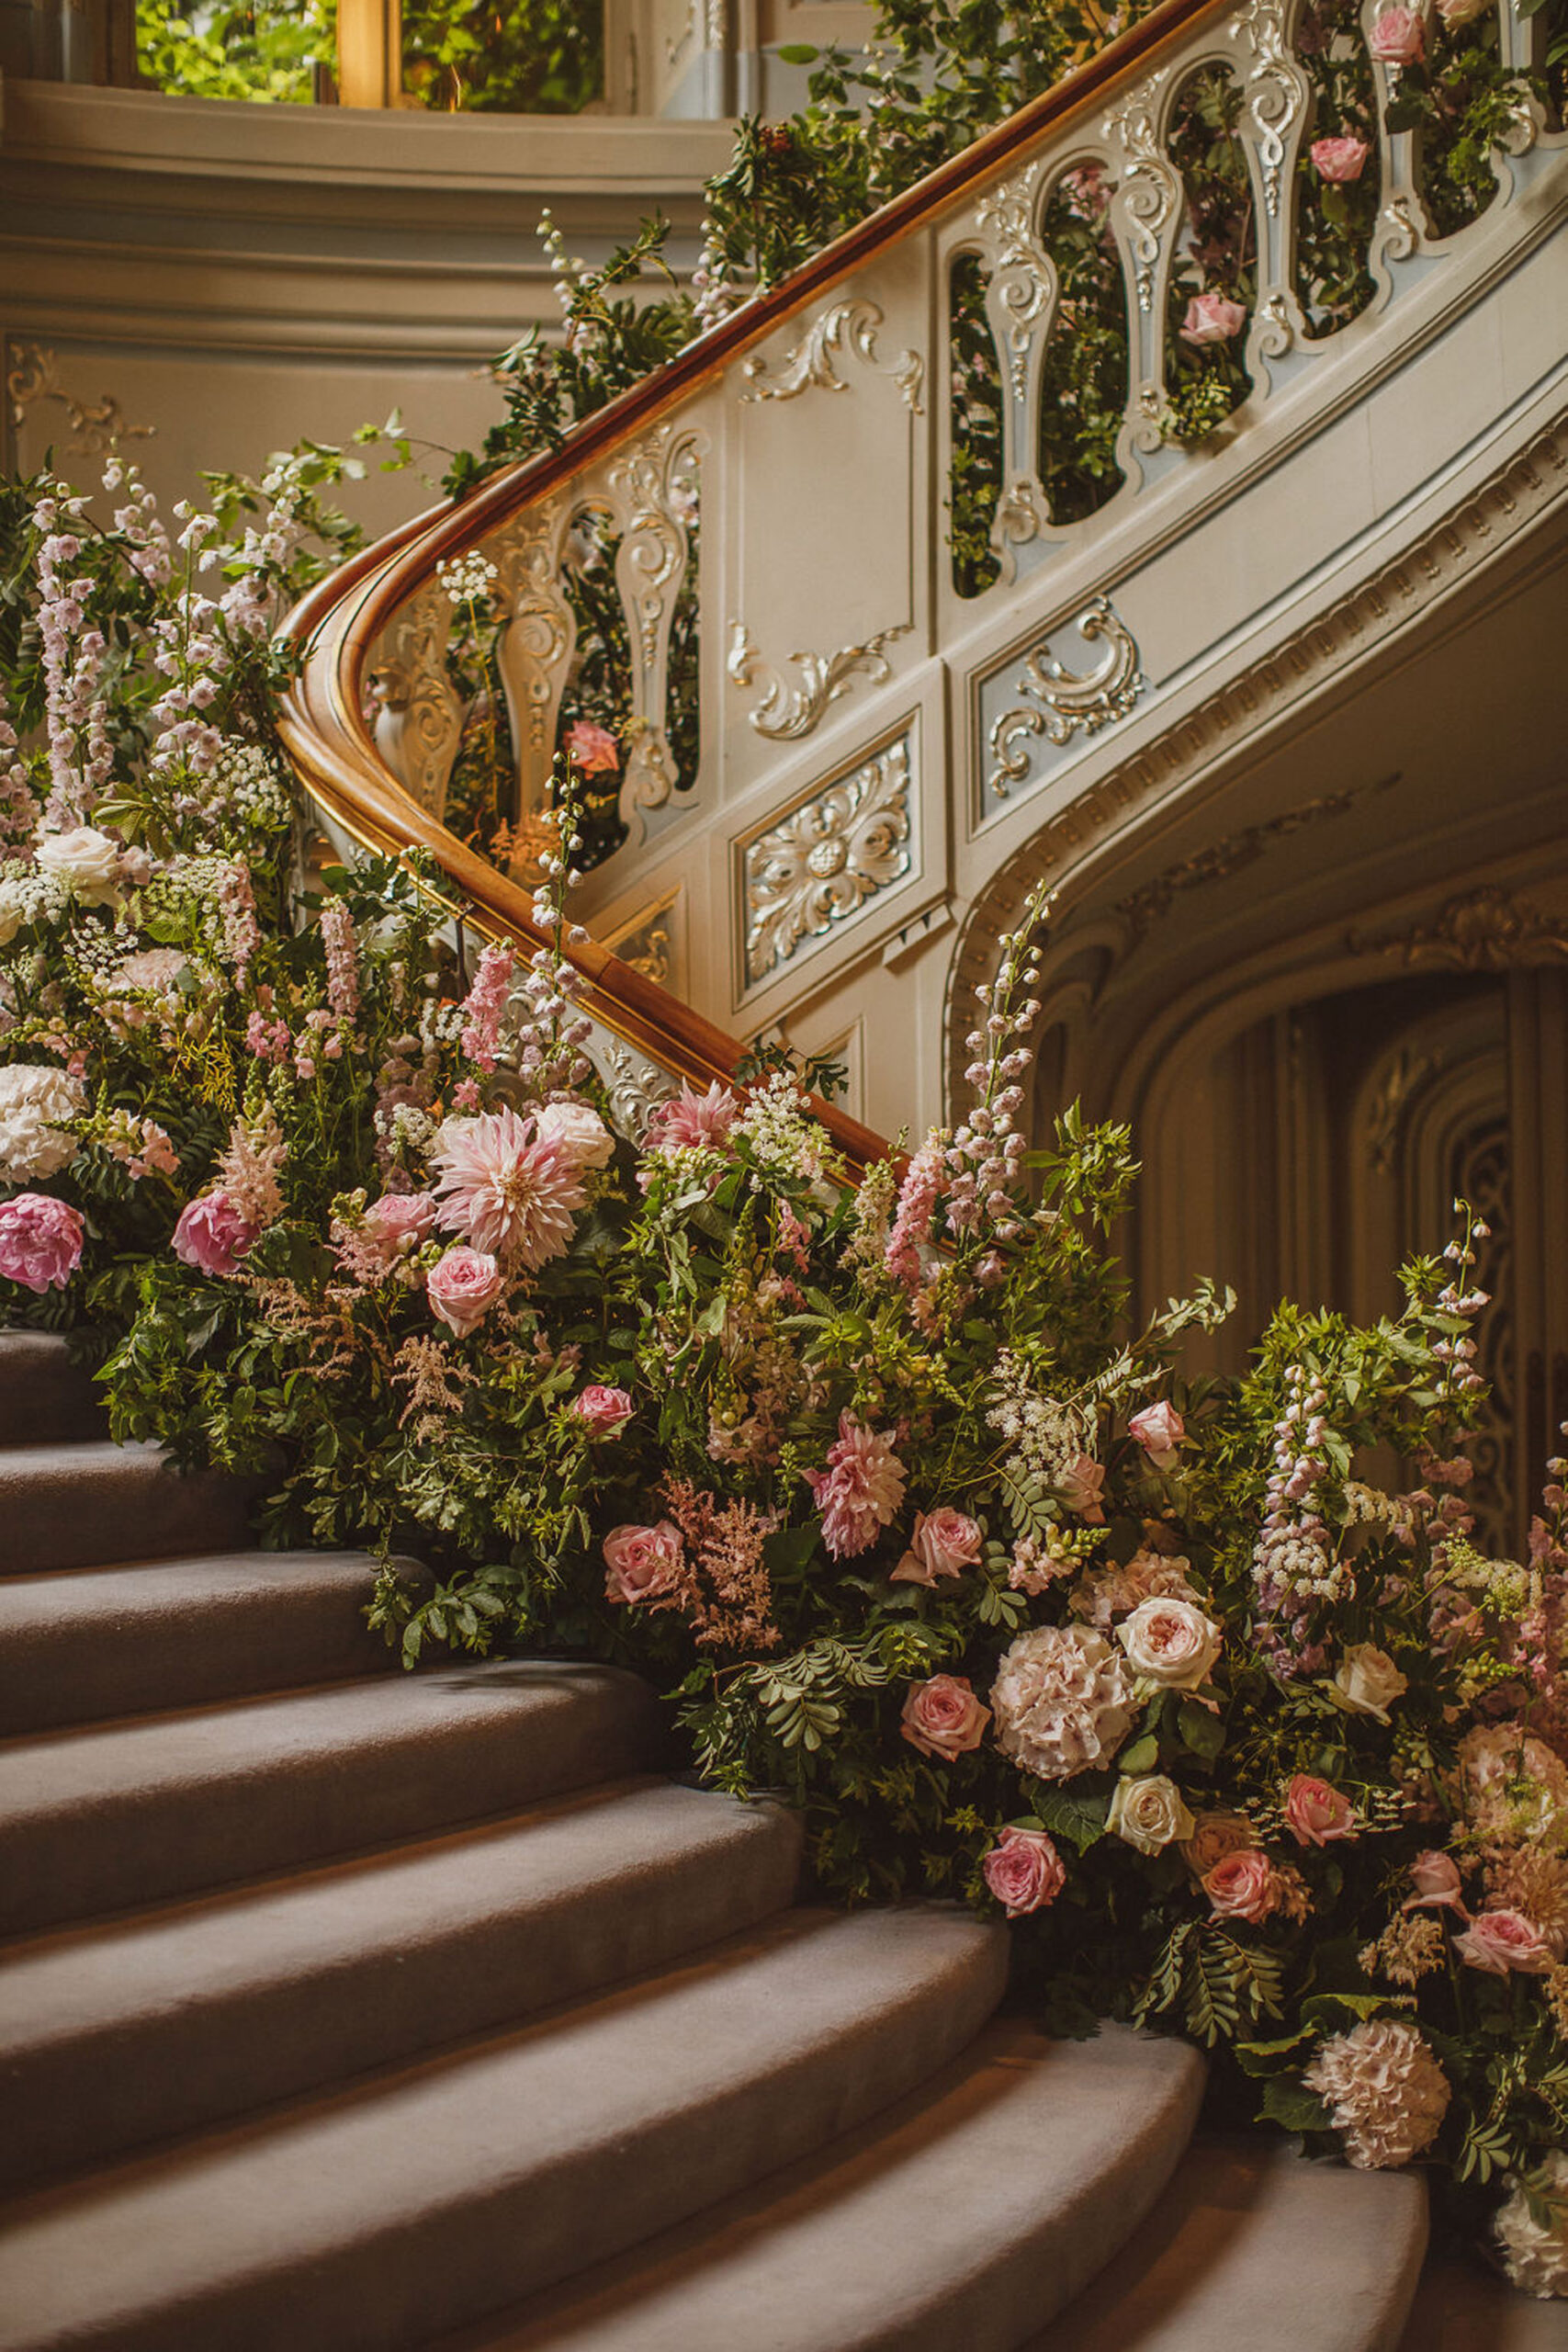 Luxurious pink and green florals almost cover the banister of a grand staircase at a wedding venue. By Niemierko